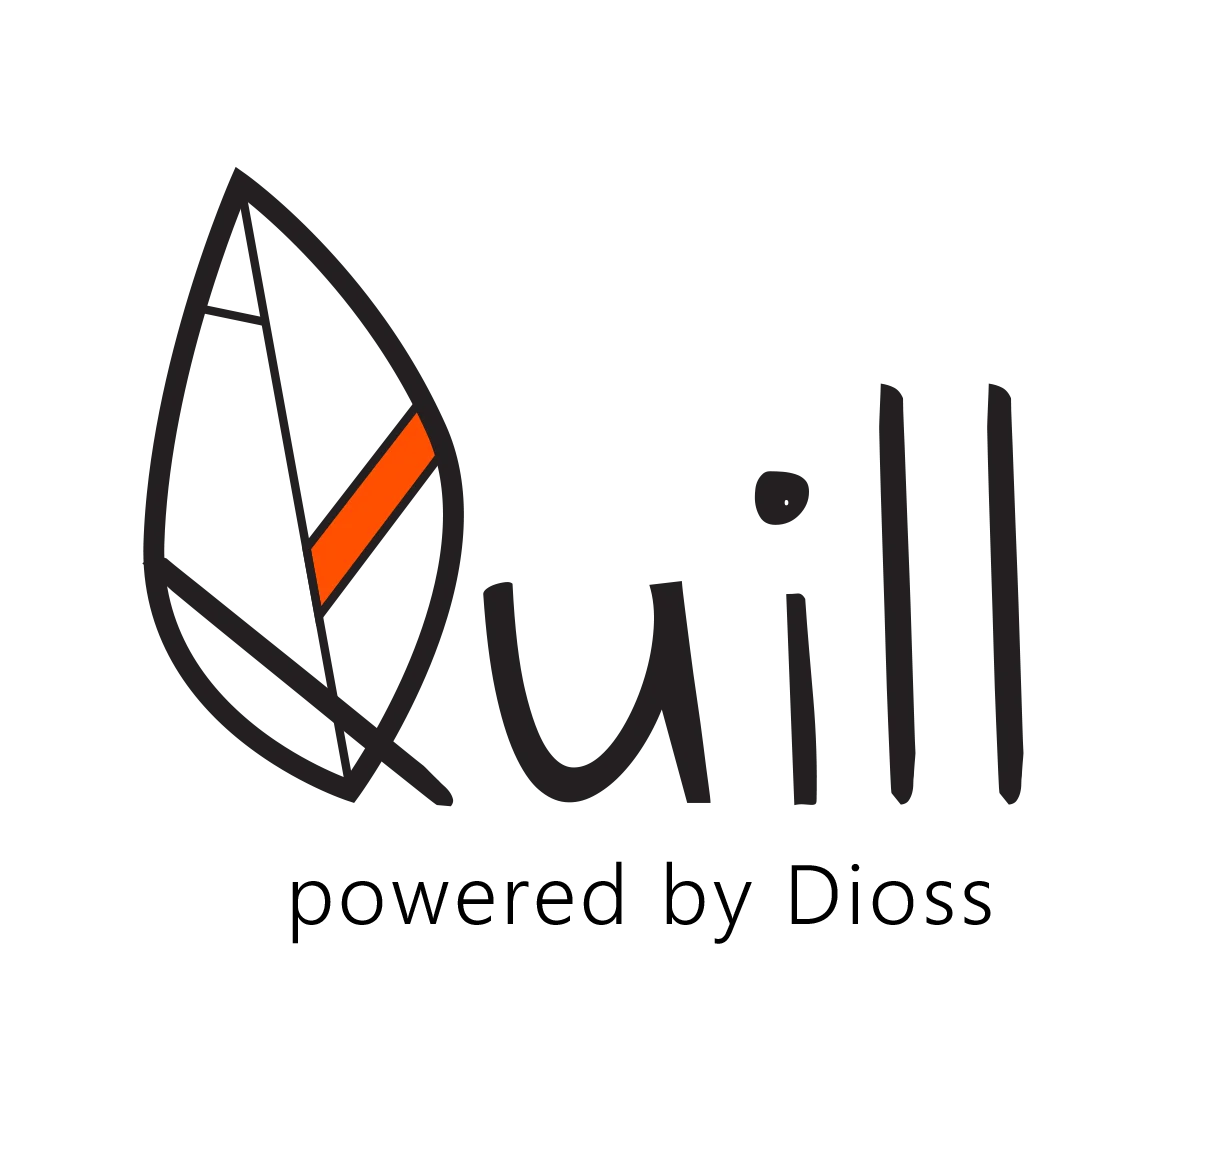 Quill logo transparant.png